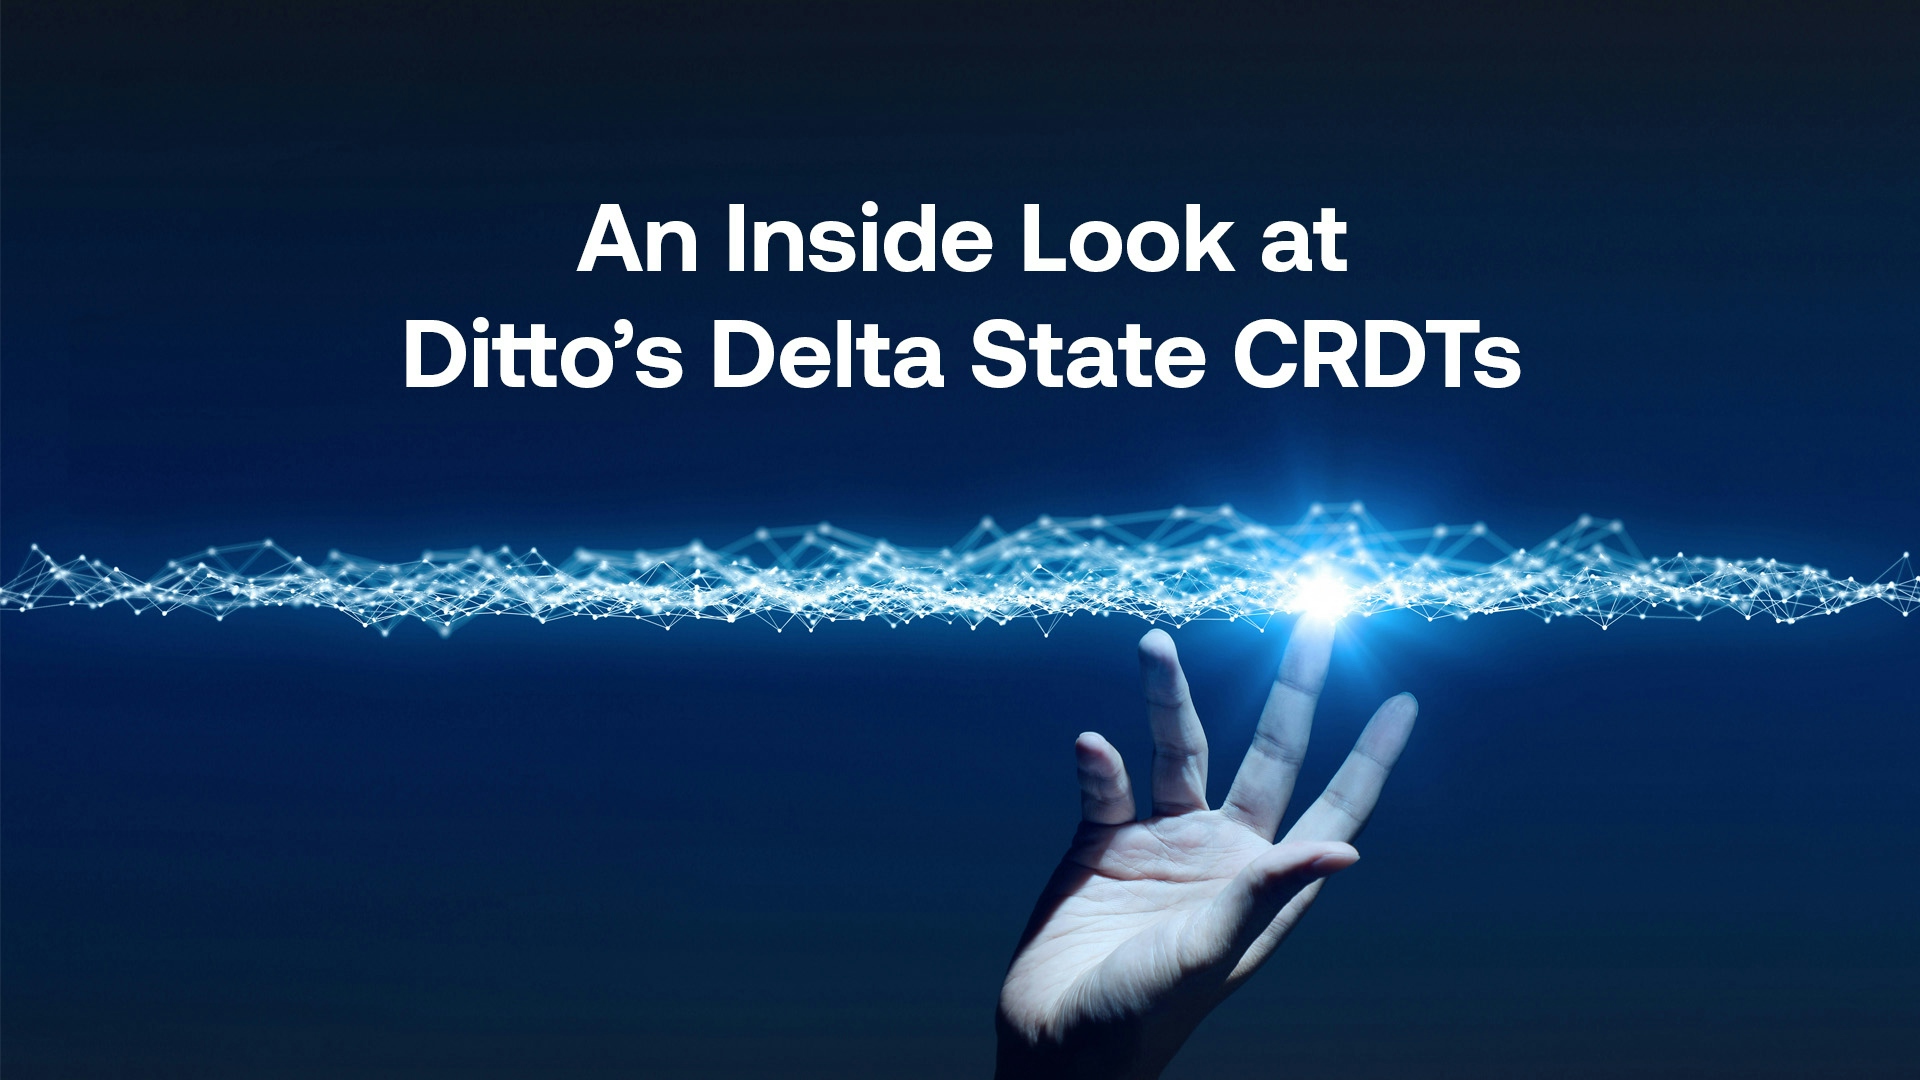 dittos-delta-state-crdts